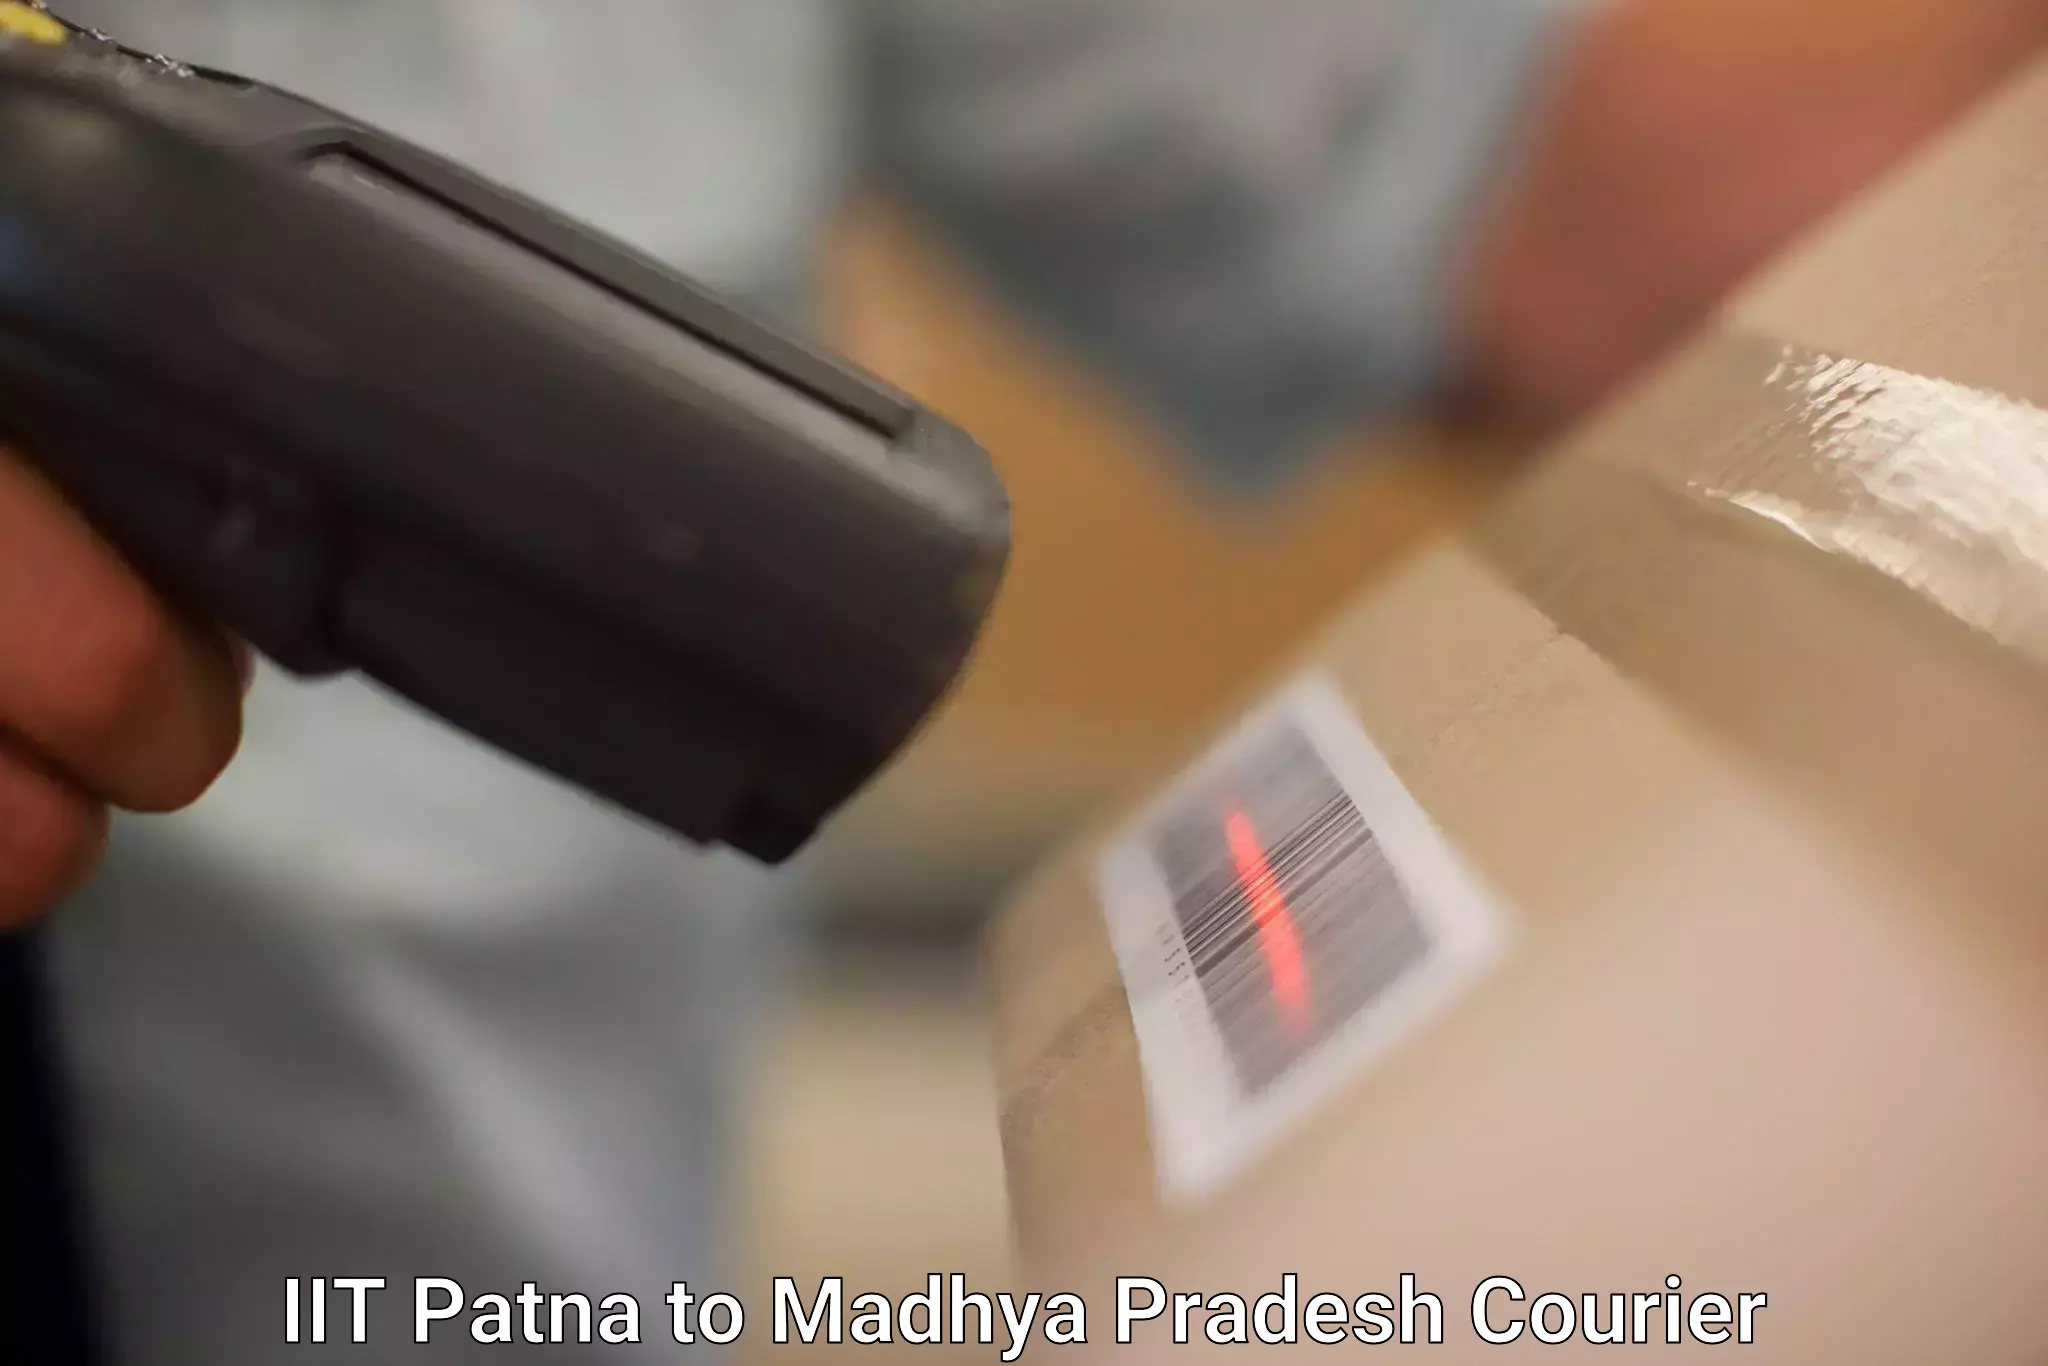 State-of-the-art courier technology IIT Patna to Bargawan